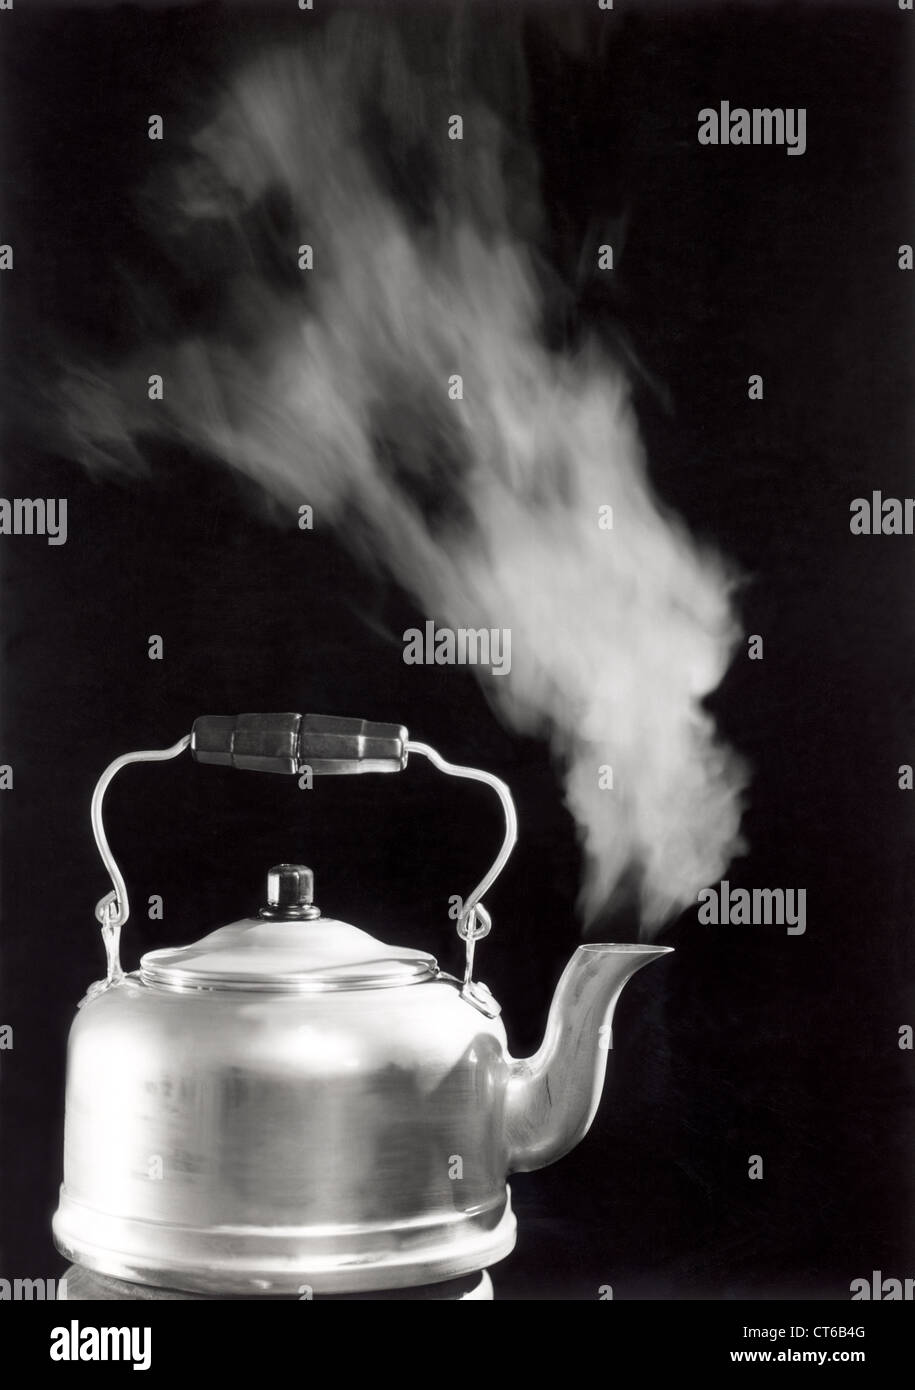 Vintage Teapot boiling with steam Stock Photo